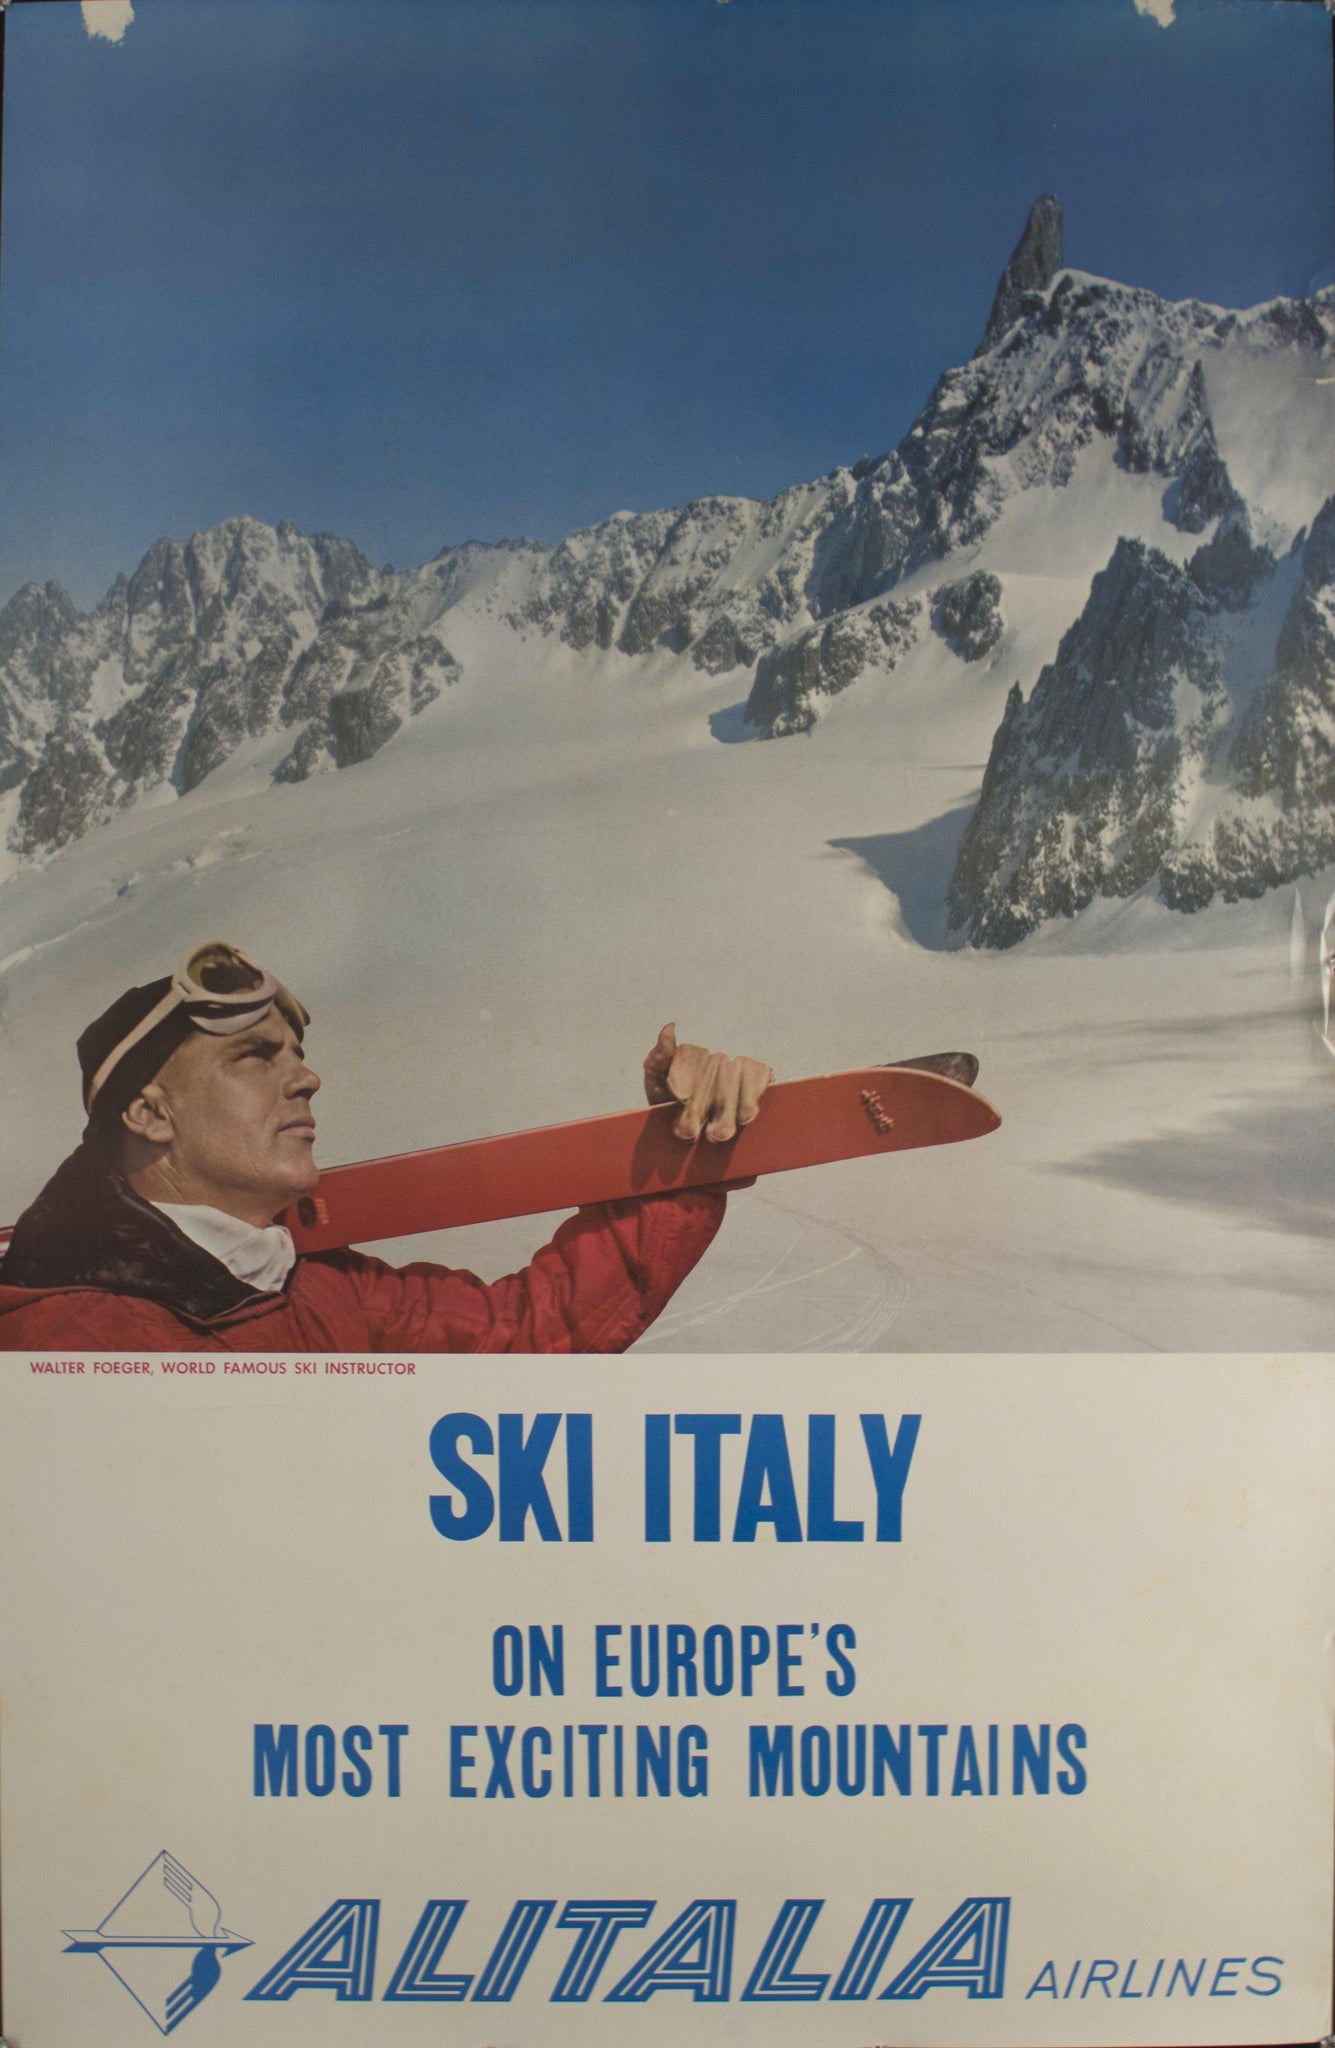 Ski Italy | On Europe's Most Exciting Mountains | Alitalia Airlines - Golden Age Posters